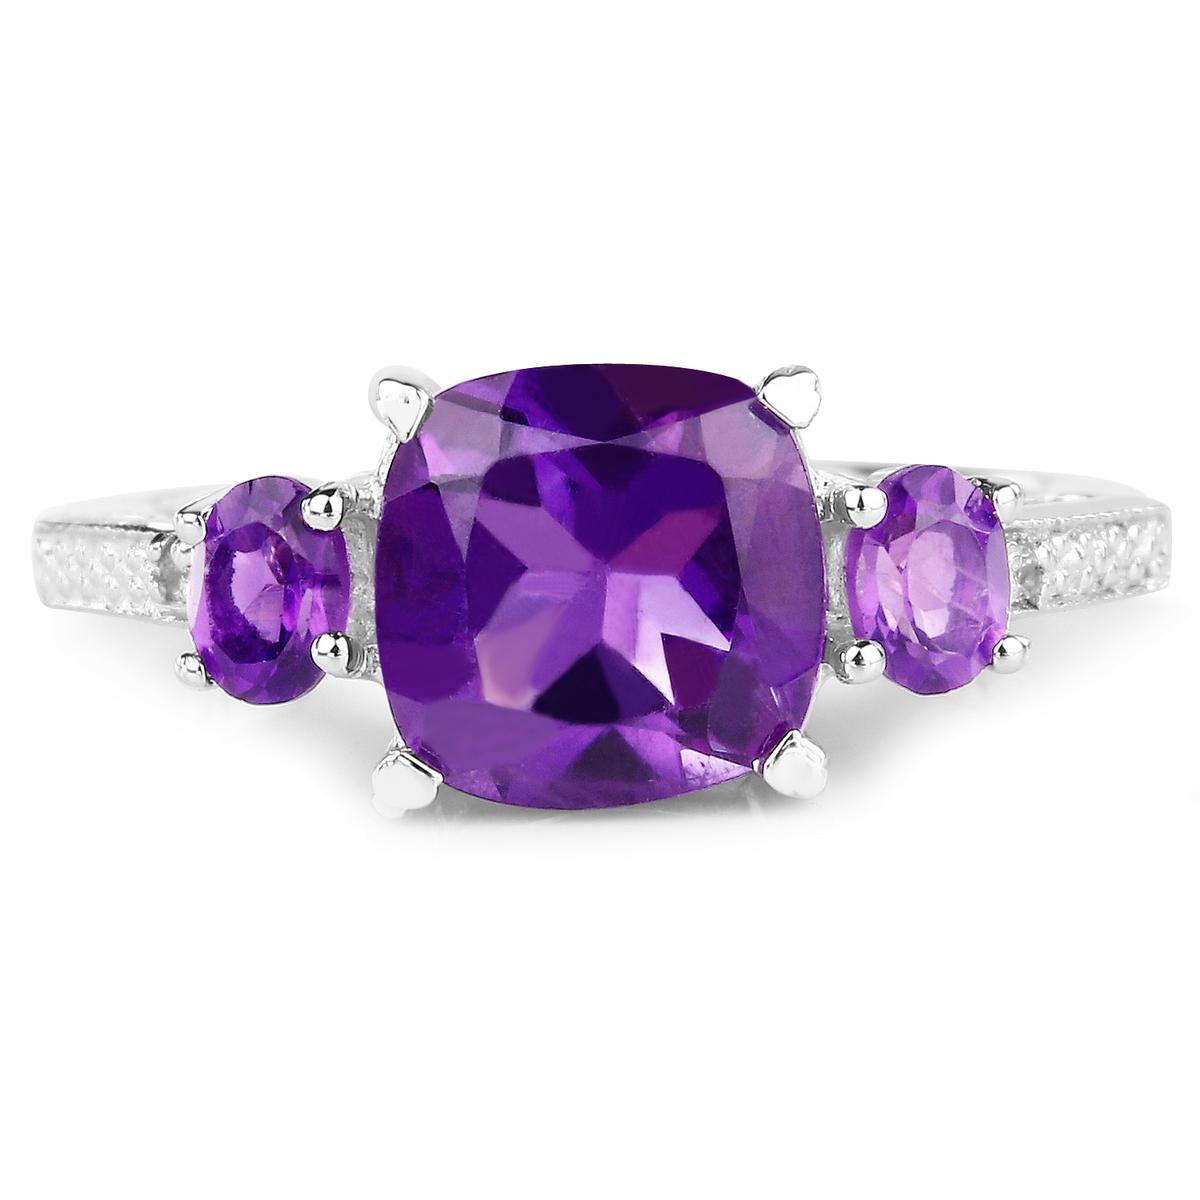 Plated Rhodium 2.37ctw Amethyst and White Topaz Ring